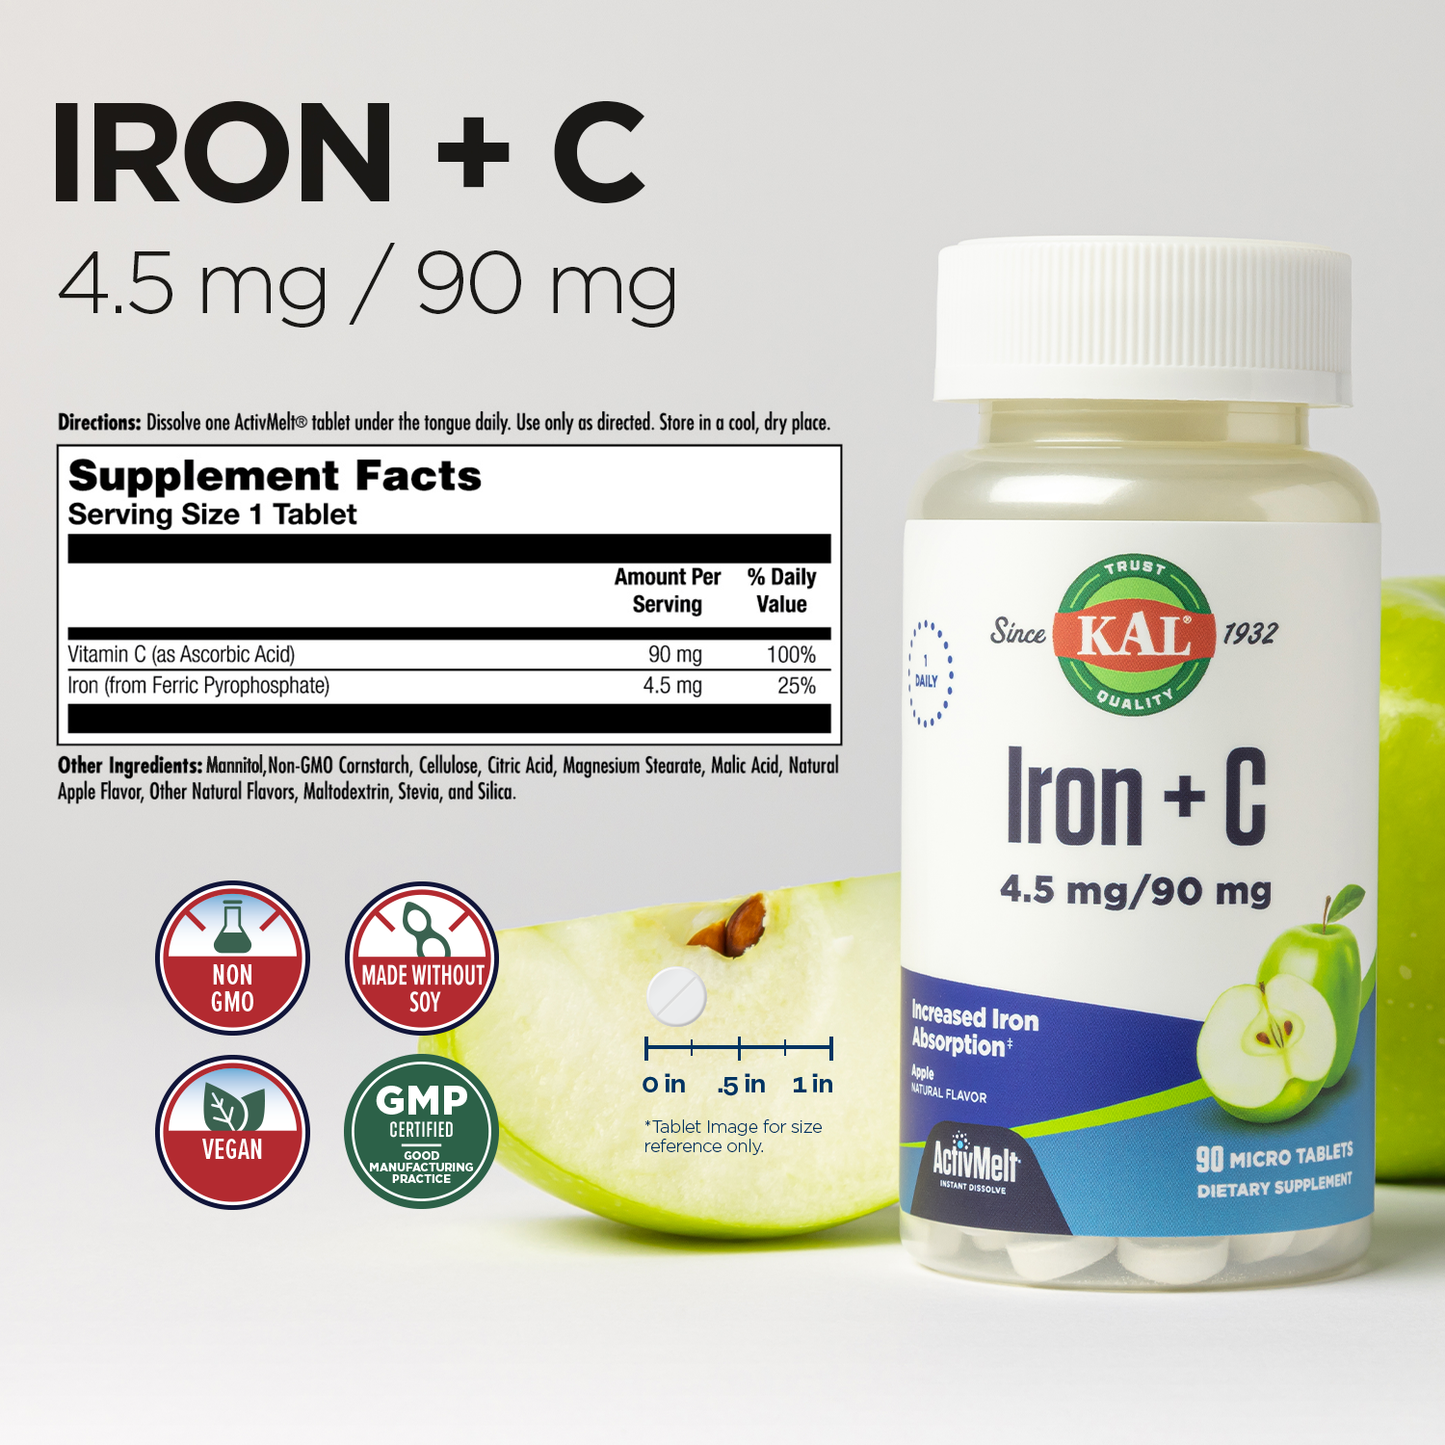 KAL Iron Plus C, Instant Dissolve Iron Supplement for Women and Men, Increased Absorption Iron Pills, Natural Apple Flavor, 60-Day Money-Back Guarantee, GMP Facility, 90 Servings, 90 Micro Tablets